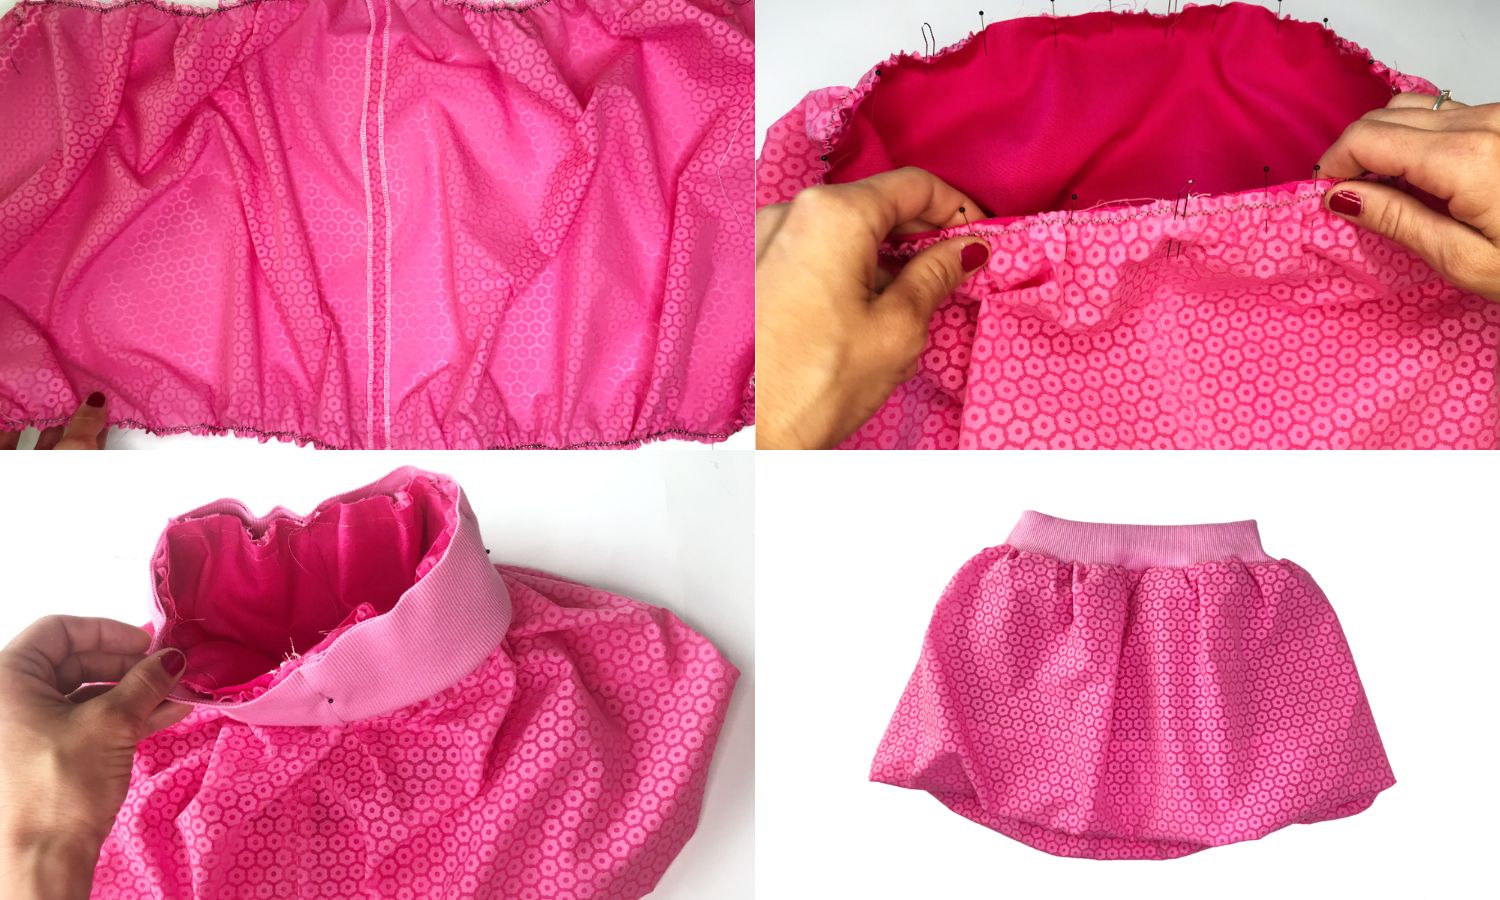 Easy step-by-step DIY bubble skirt tutorial.